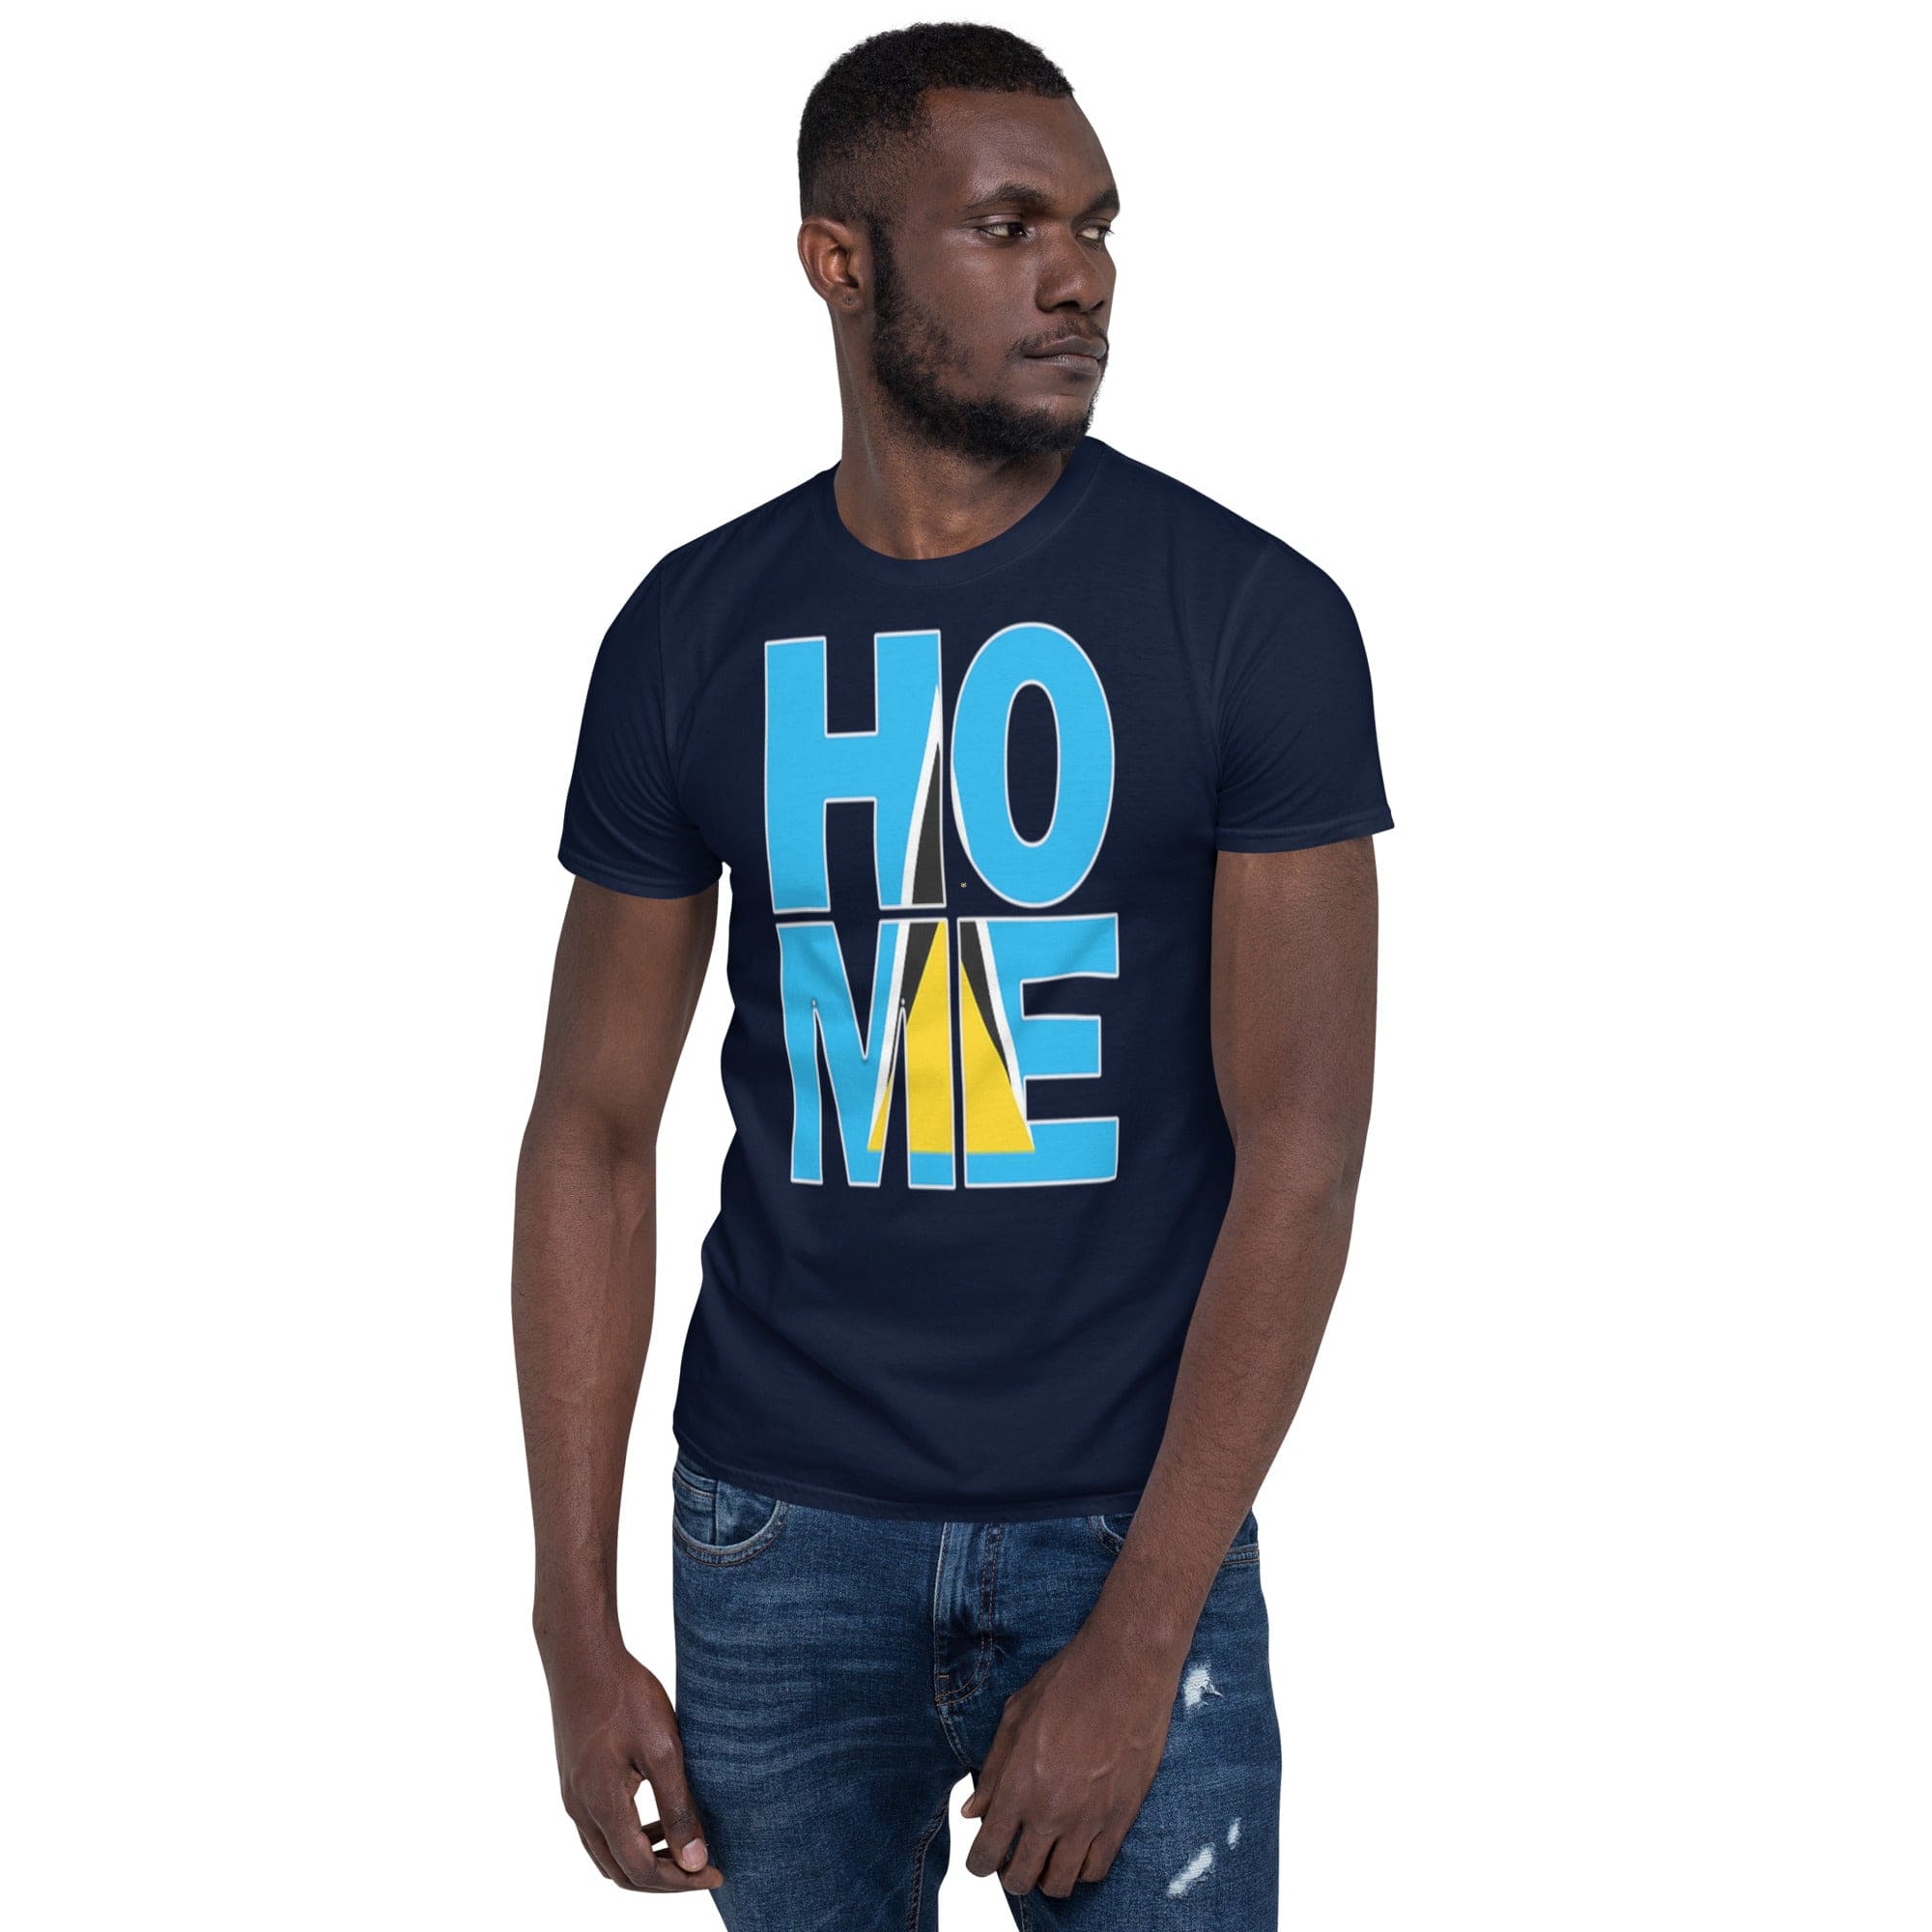 St. Lucia Flag design in the words HOME on a navy color shirt on the front of a black man.